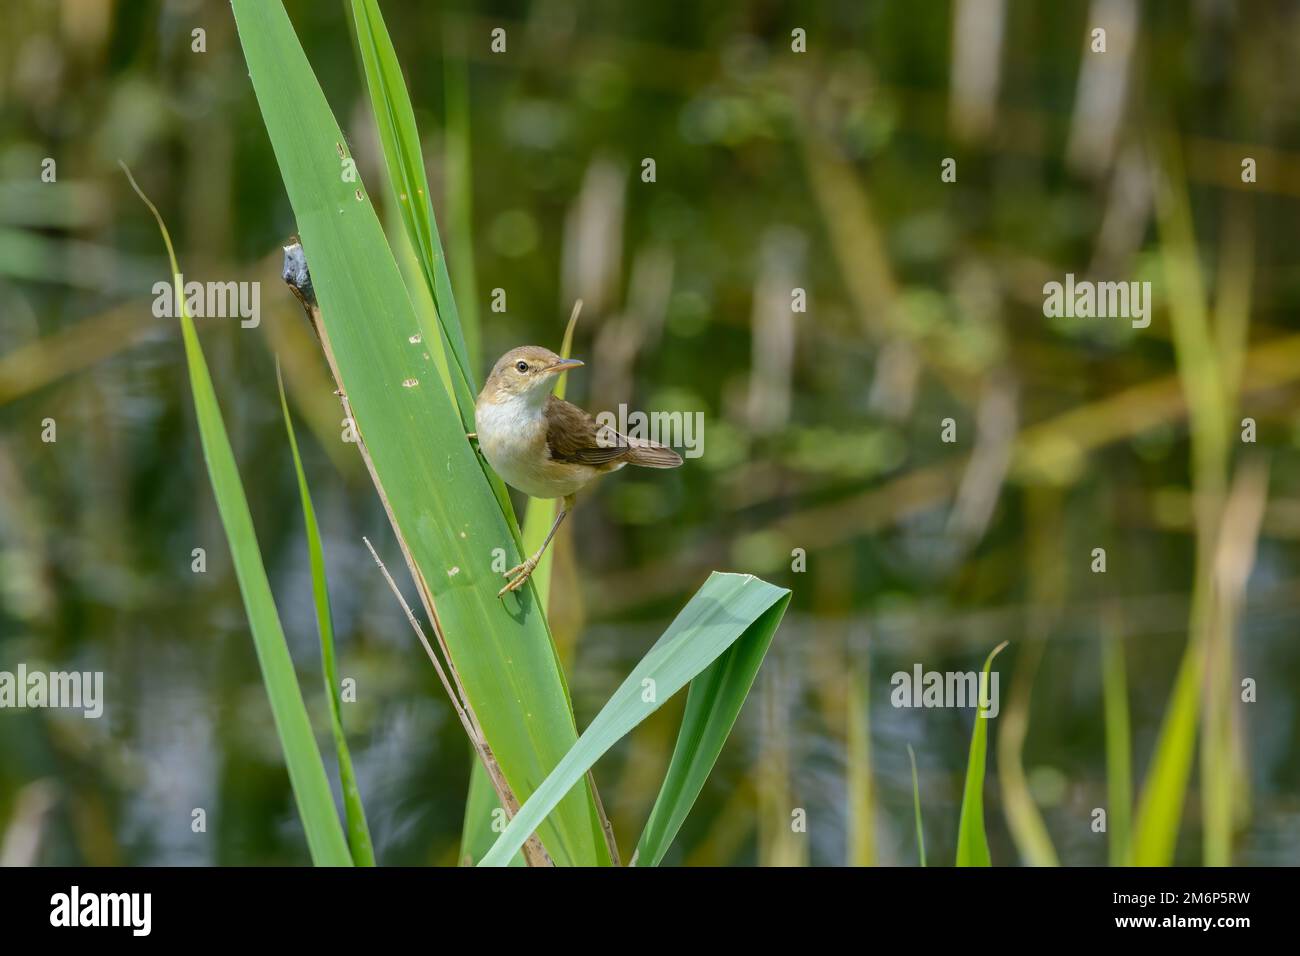 Reed Warbler, Acrocephalus scirpaceus, climbing a reed stem, frontal view facing left. Stock Photo